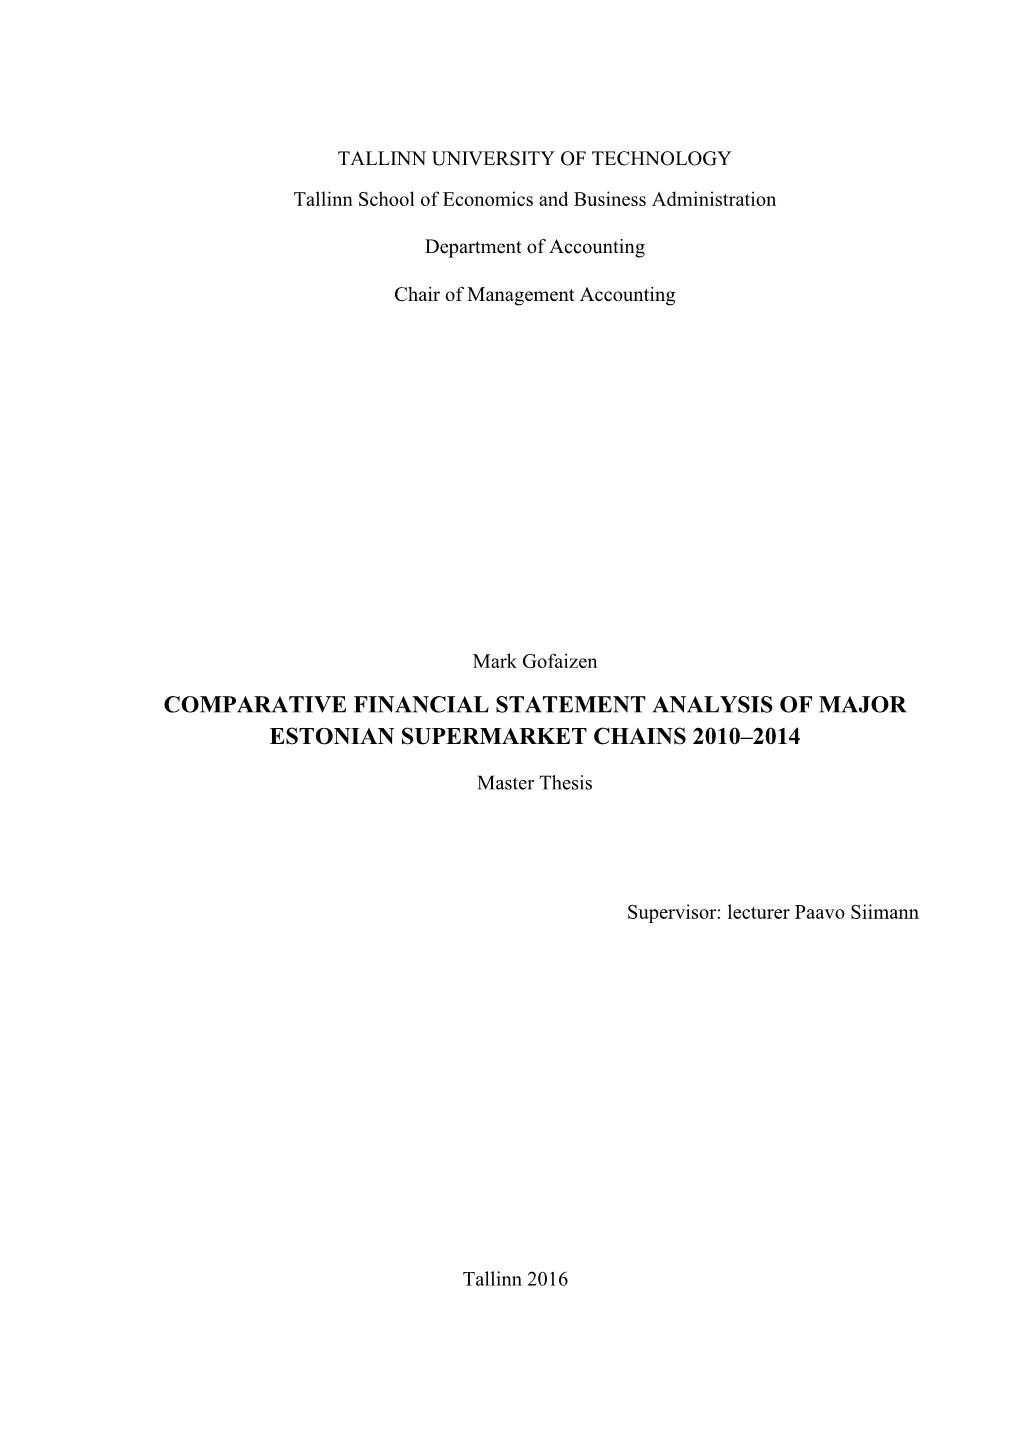 Comparative Financial Statement Analysis of Major Estonian Supermarket Chains 2010–2014